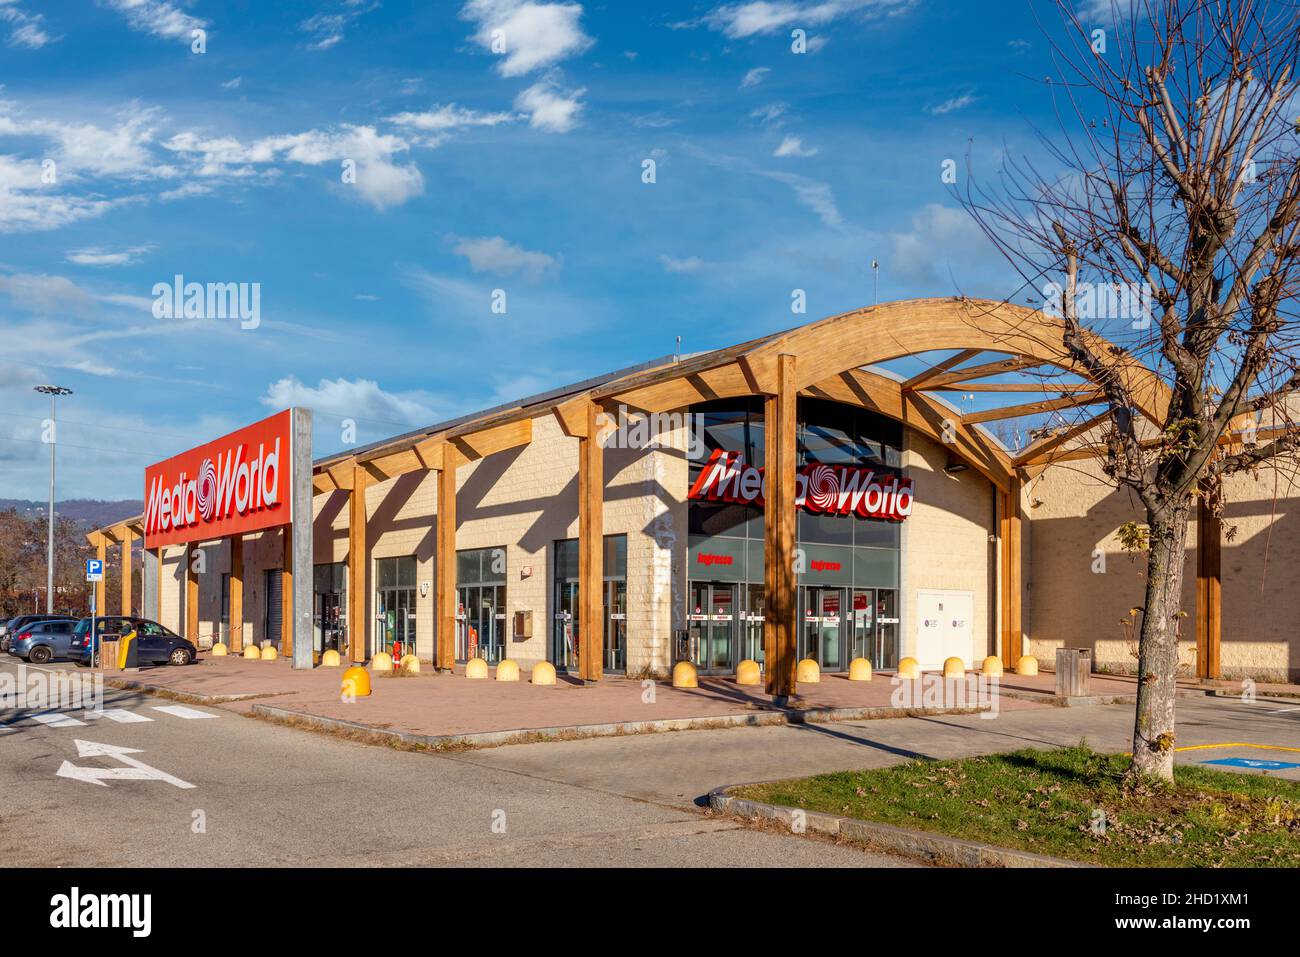 Moncalieri, Turin, Italy - December 6, 2021: building of Media World store on the blue sky with clouds, it is stores selling consumer electronics of t Stock Photo